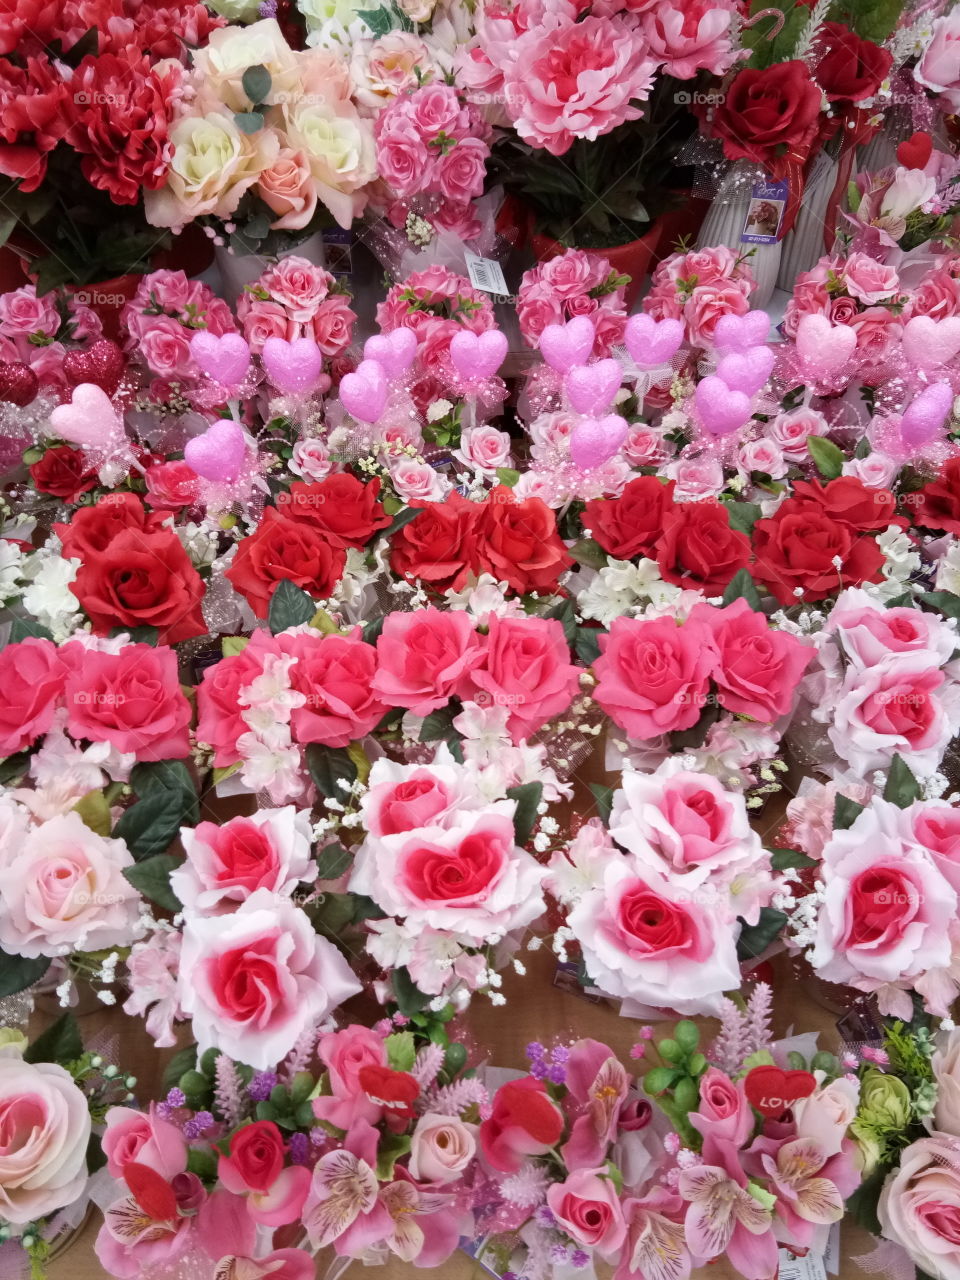 roes 
valentine
love
many
colors
flower